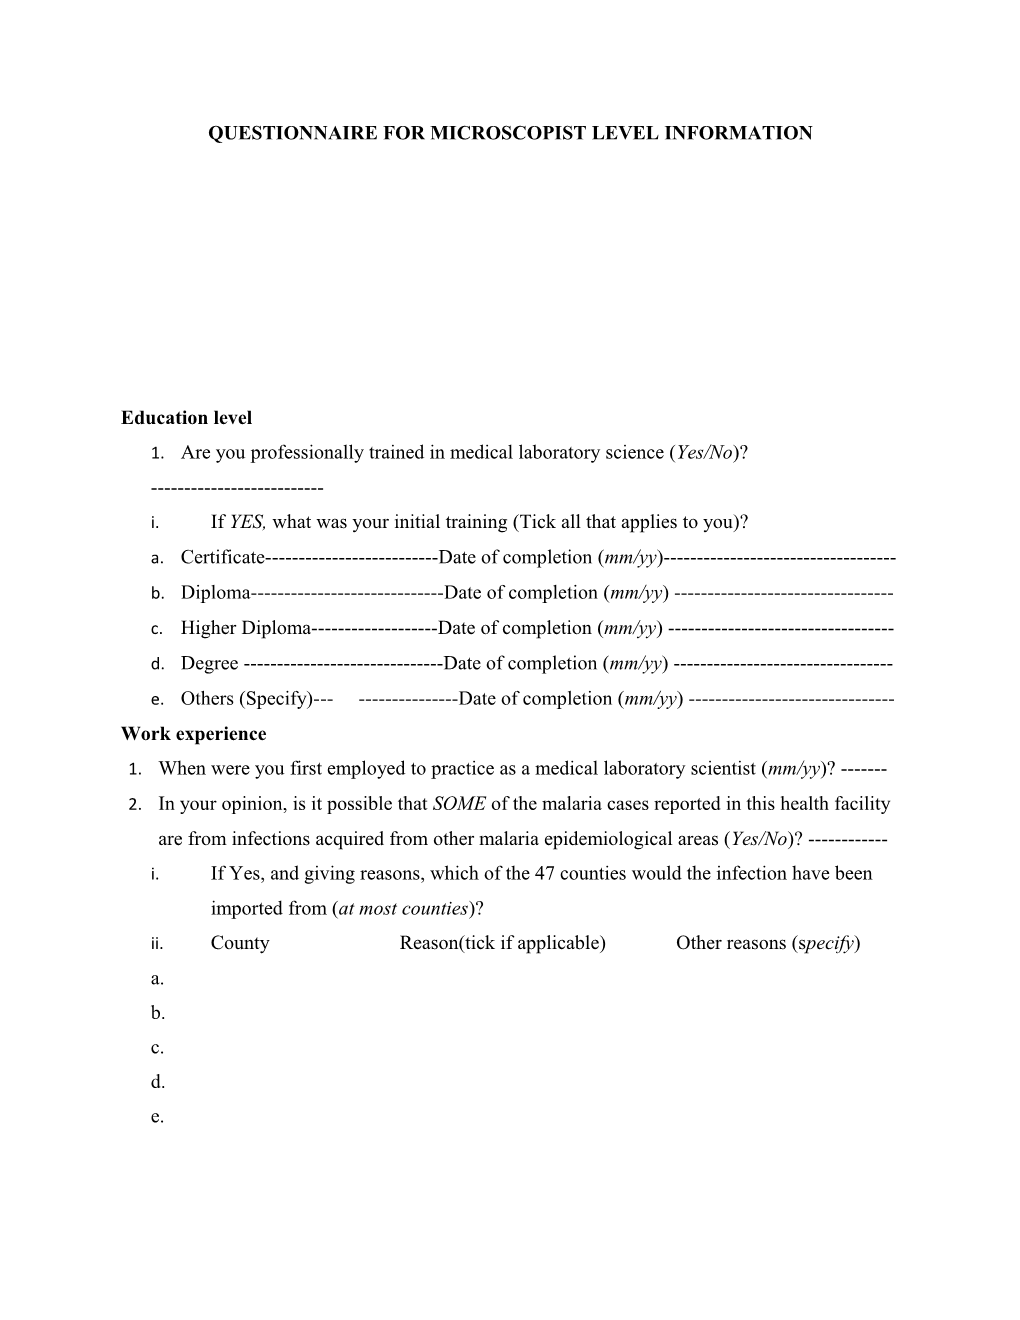 Questionnaire for Microscopist Level Information